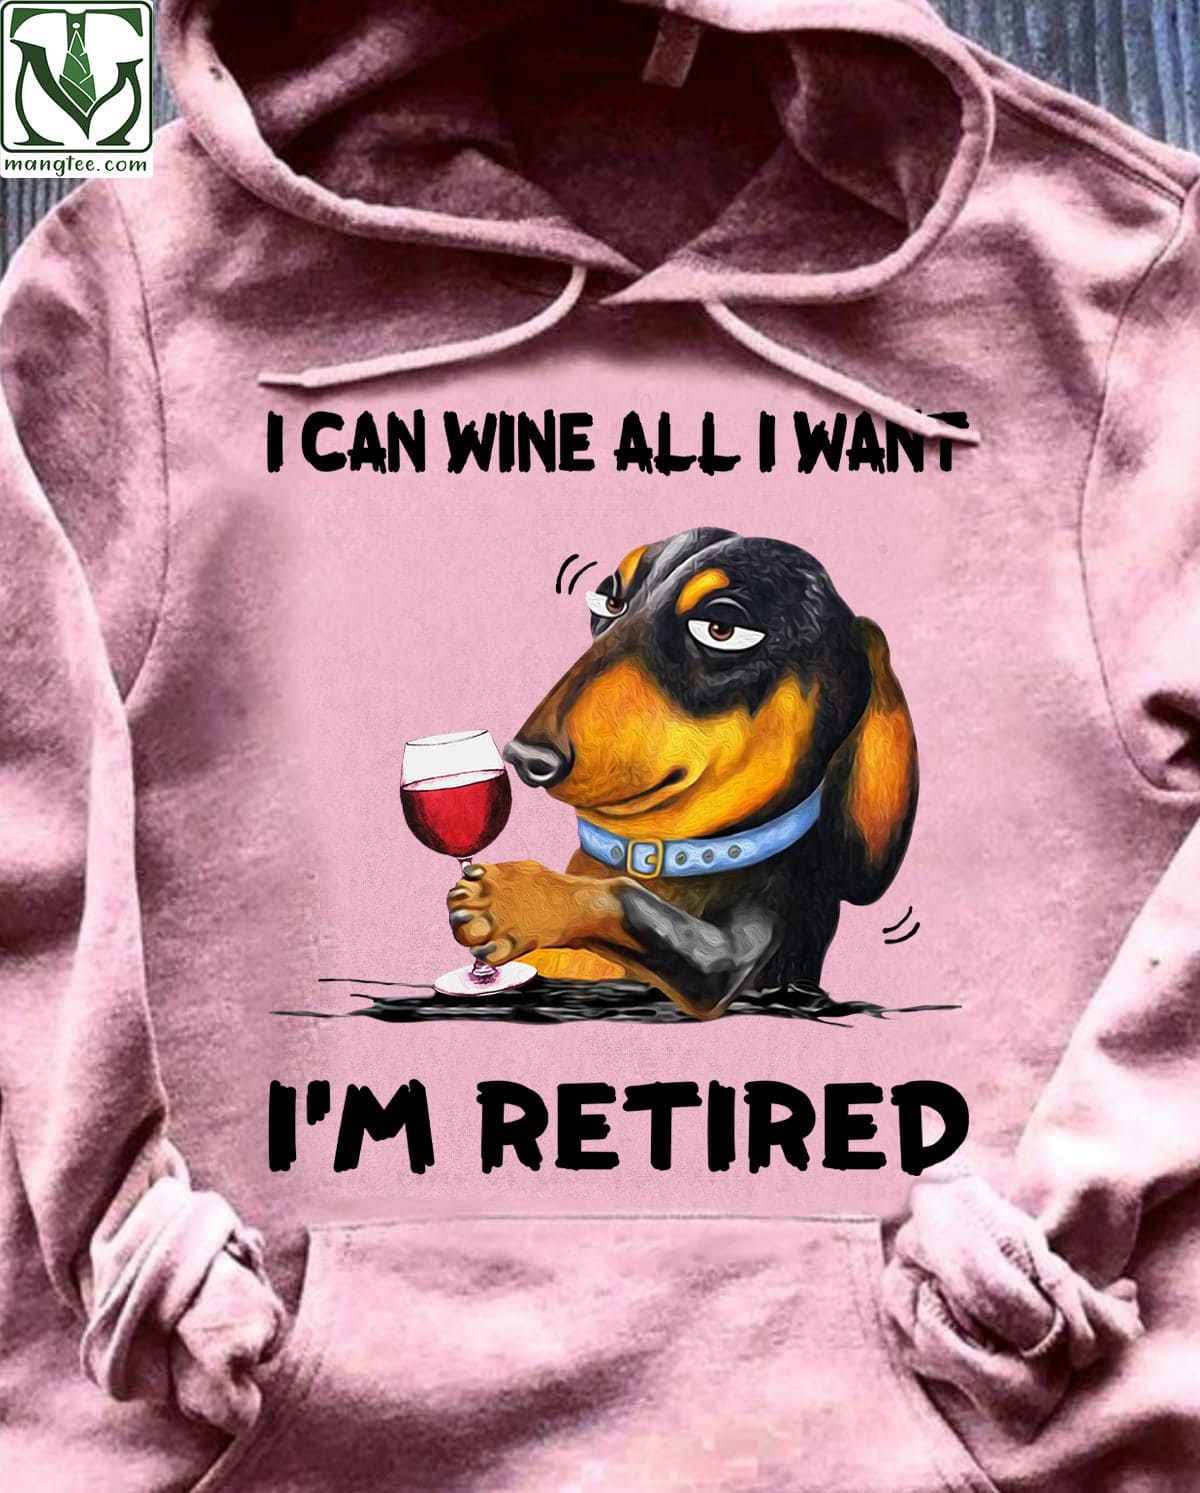 I can win all I want I'm retired - Dachshund drinking wine, dog and wine lover